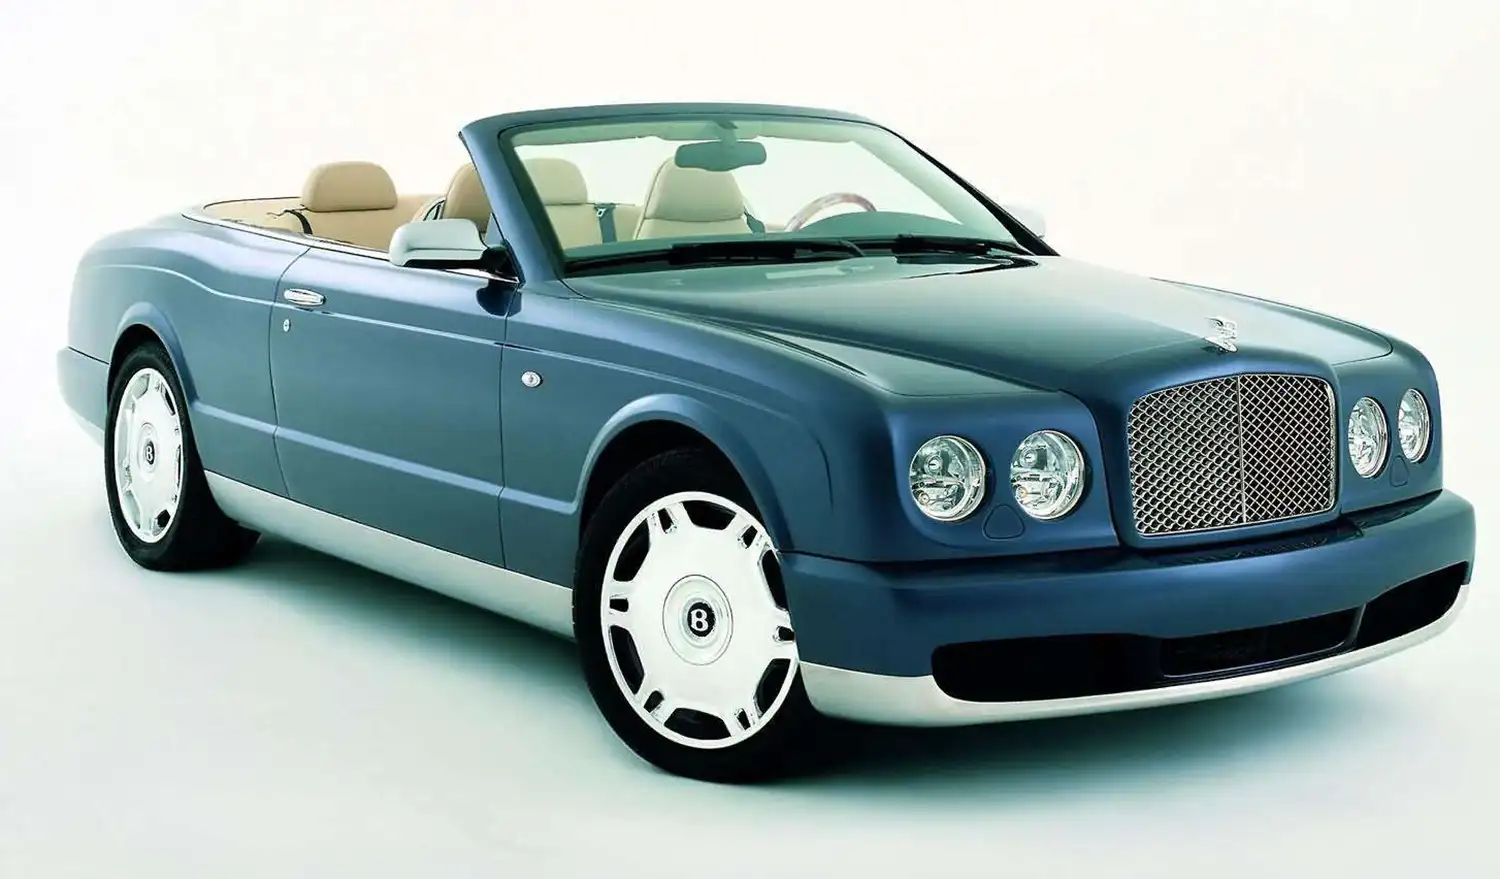 Bentley Arnage Drophead Coupe: A Pinnacle of Luxury and Performance